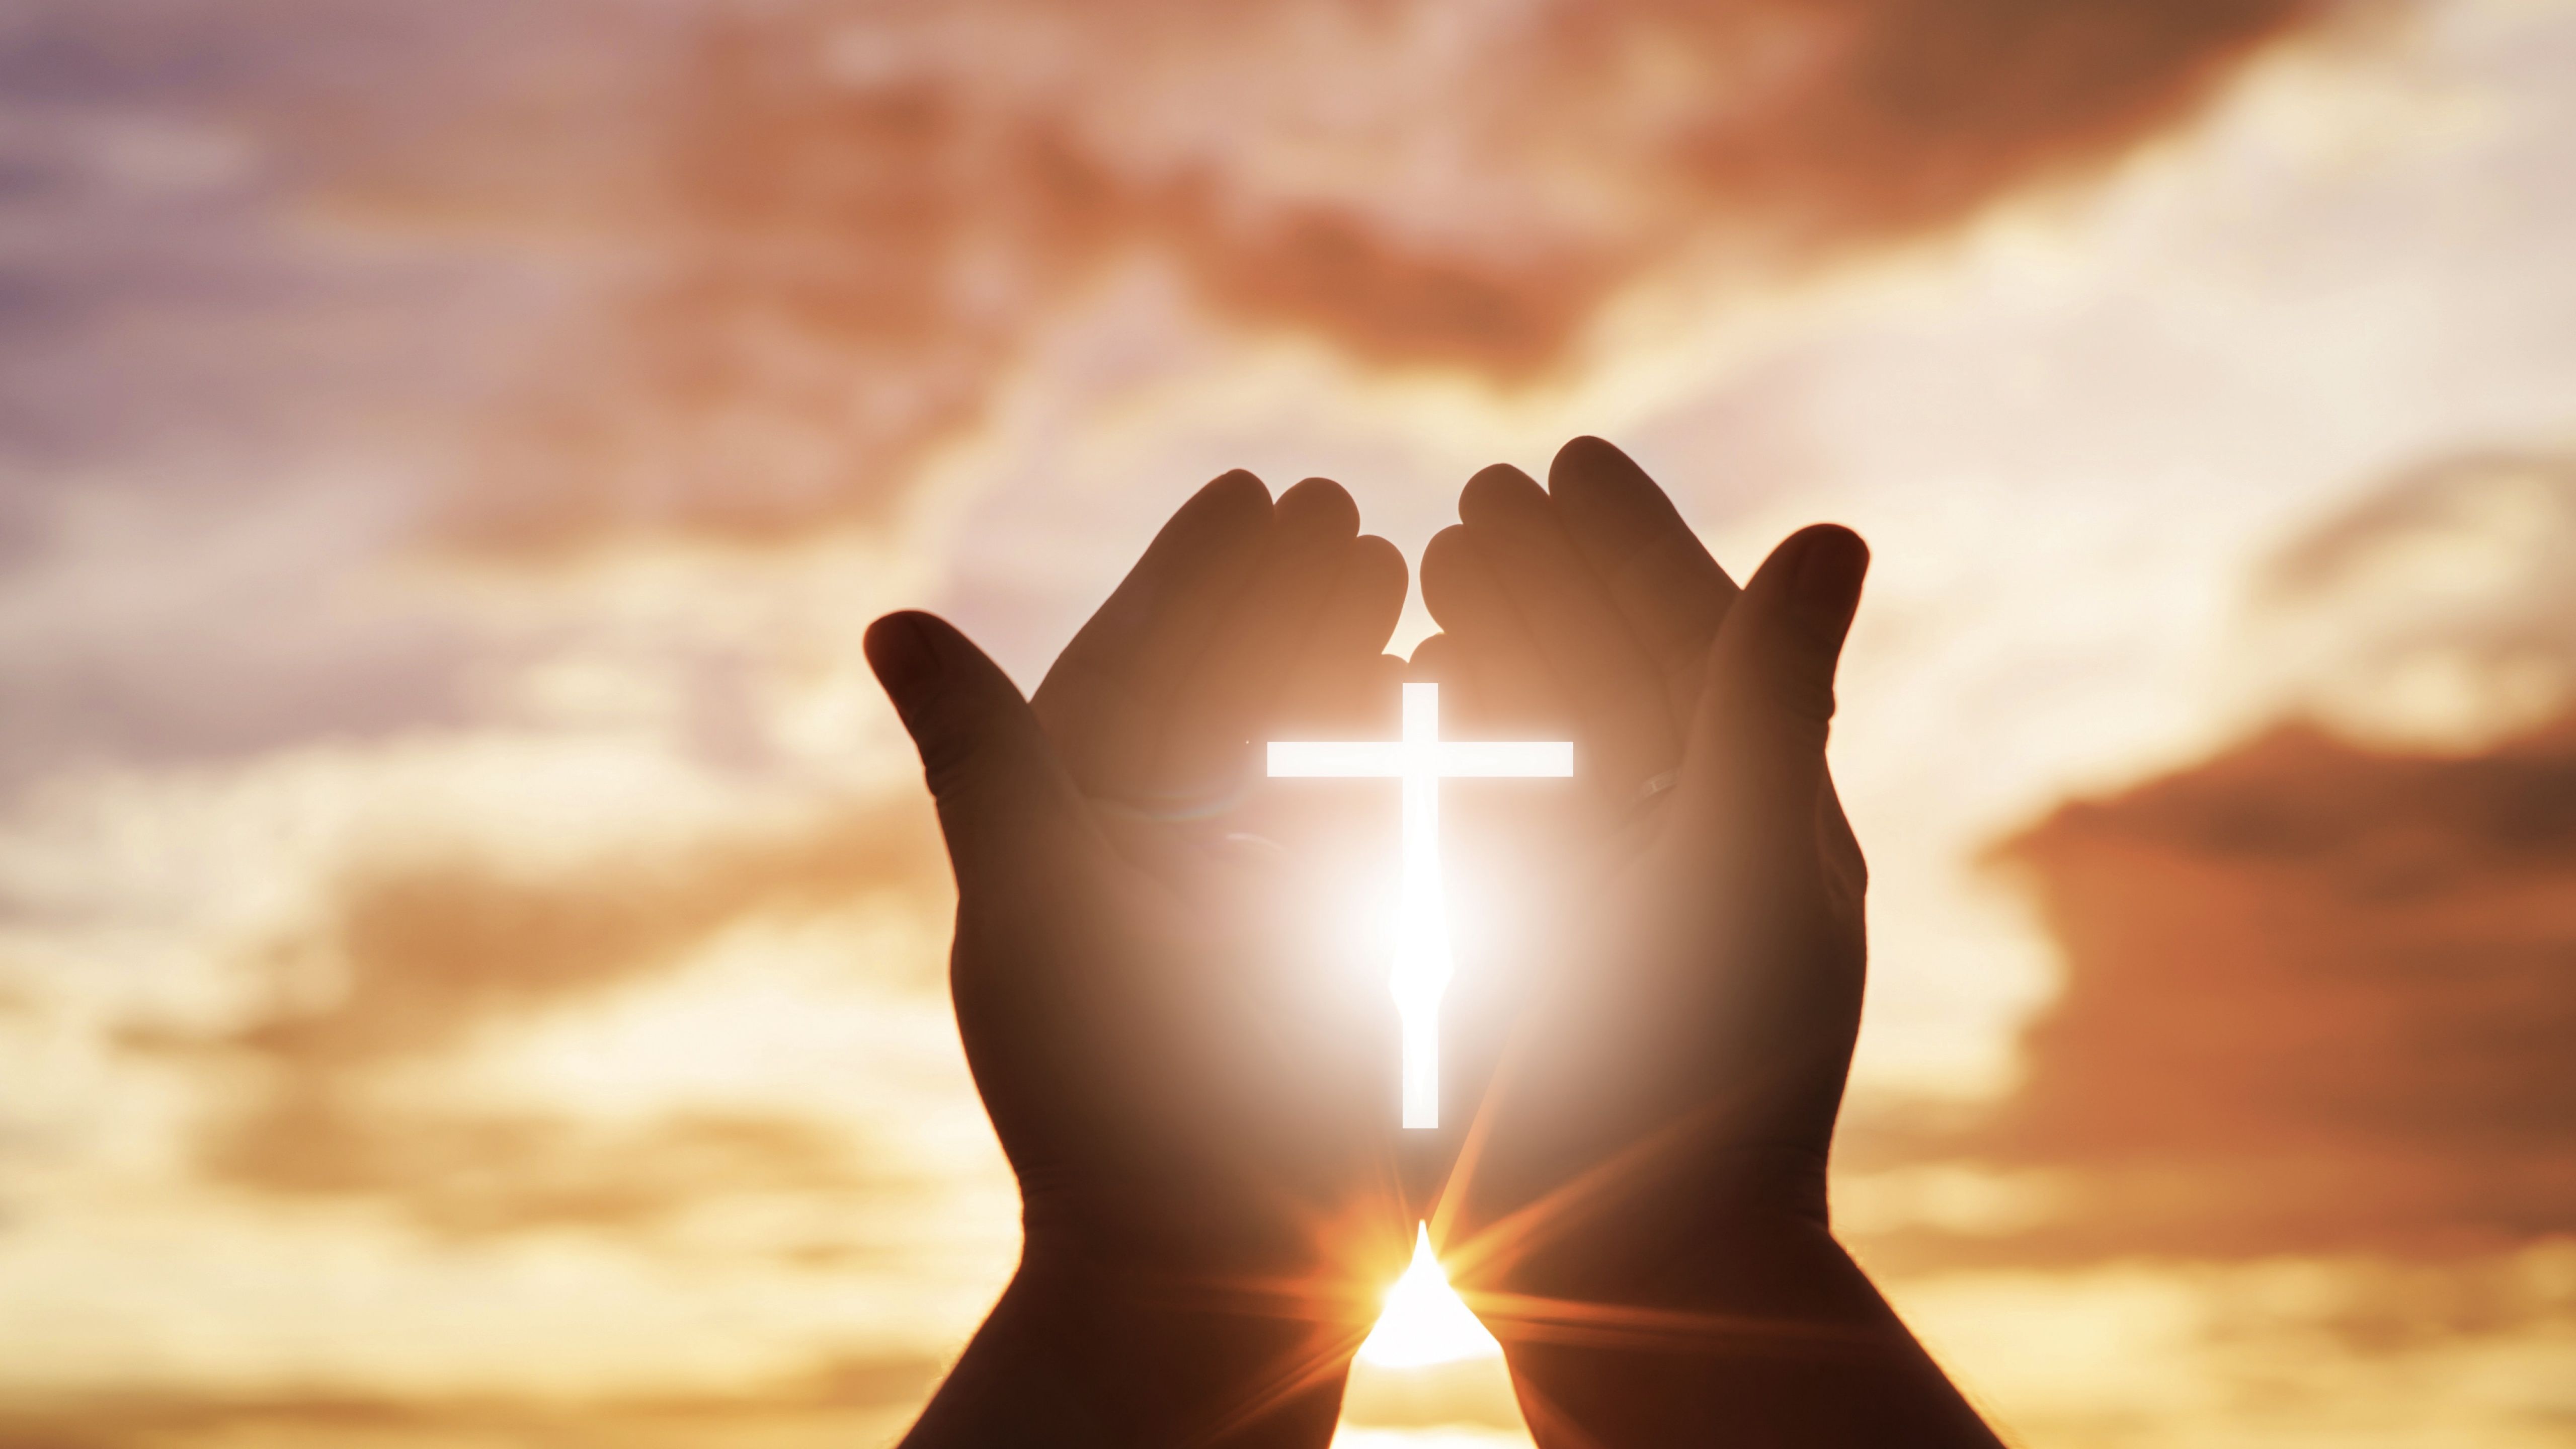 Hands holding a cross with the sun behind it - Cross